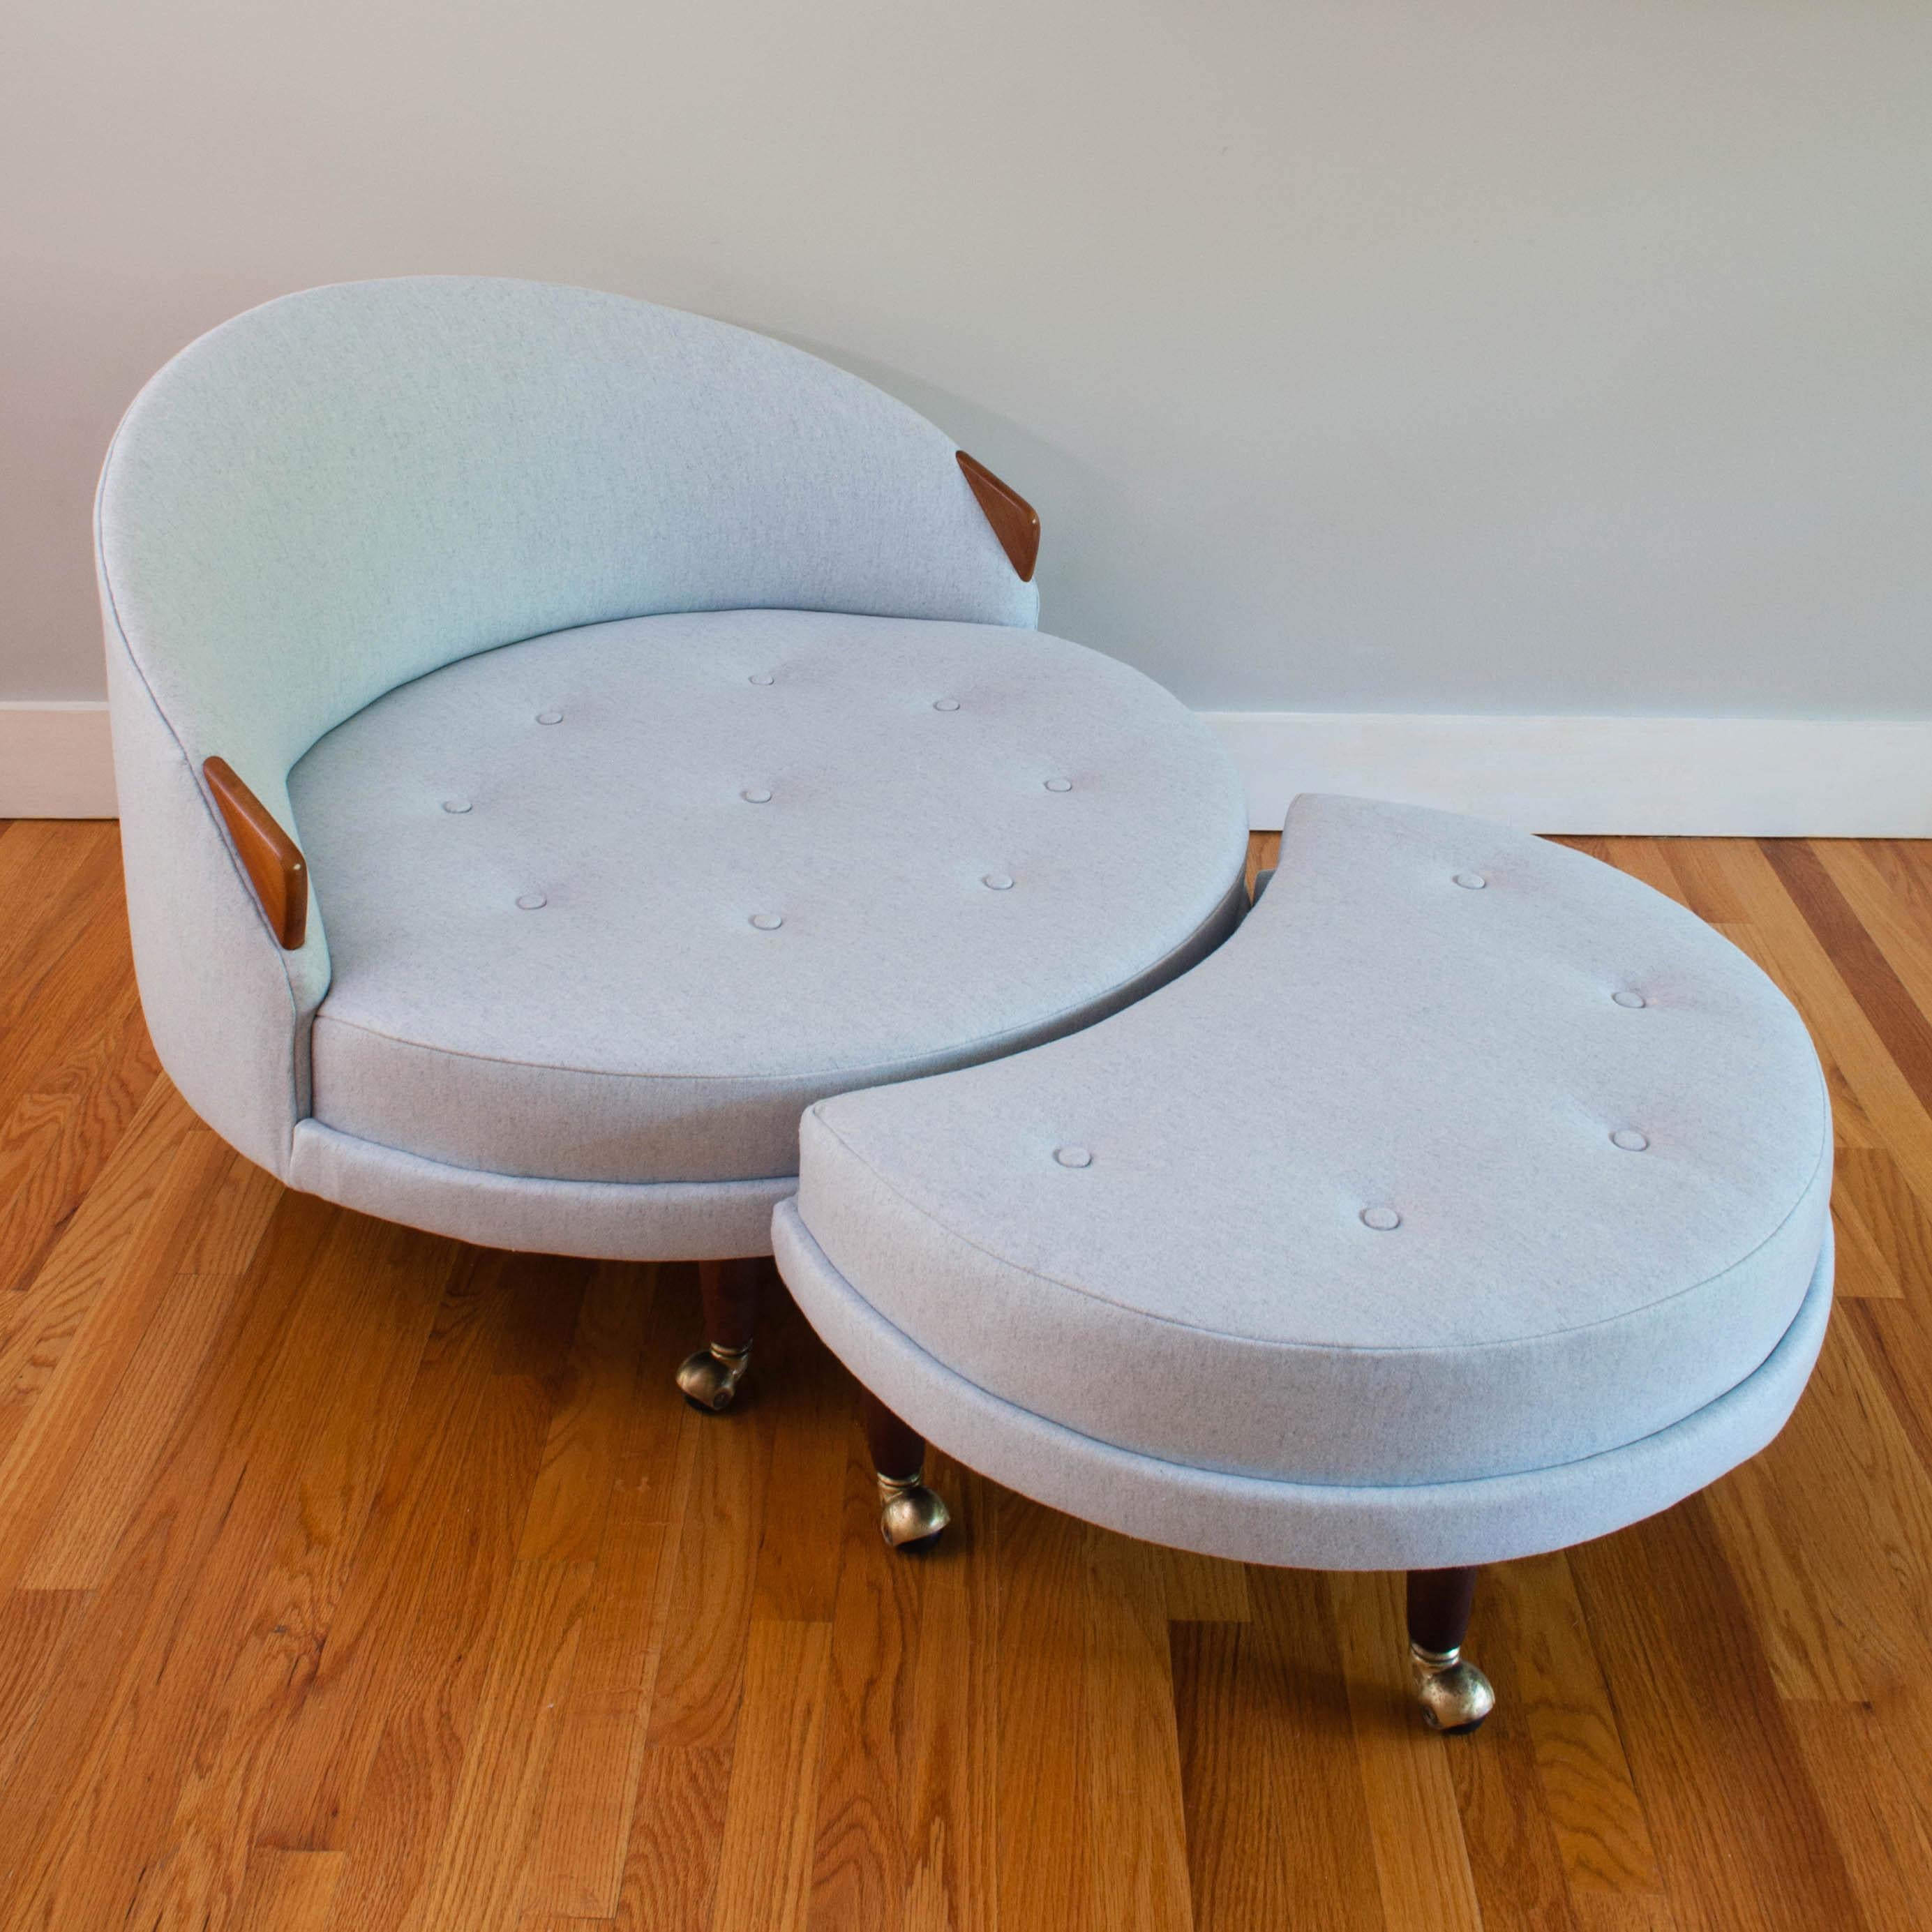 Iconic round “Havana” lounge chair by Adrian Pearsall for Craft Associates. This midcentury gem has been completely restored and features all new foam, light grey wool upholstery and refinished walnut arms and legs. The original brass casters have